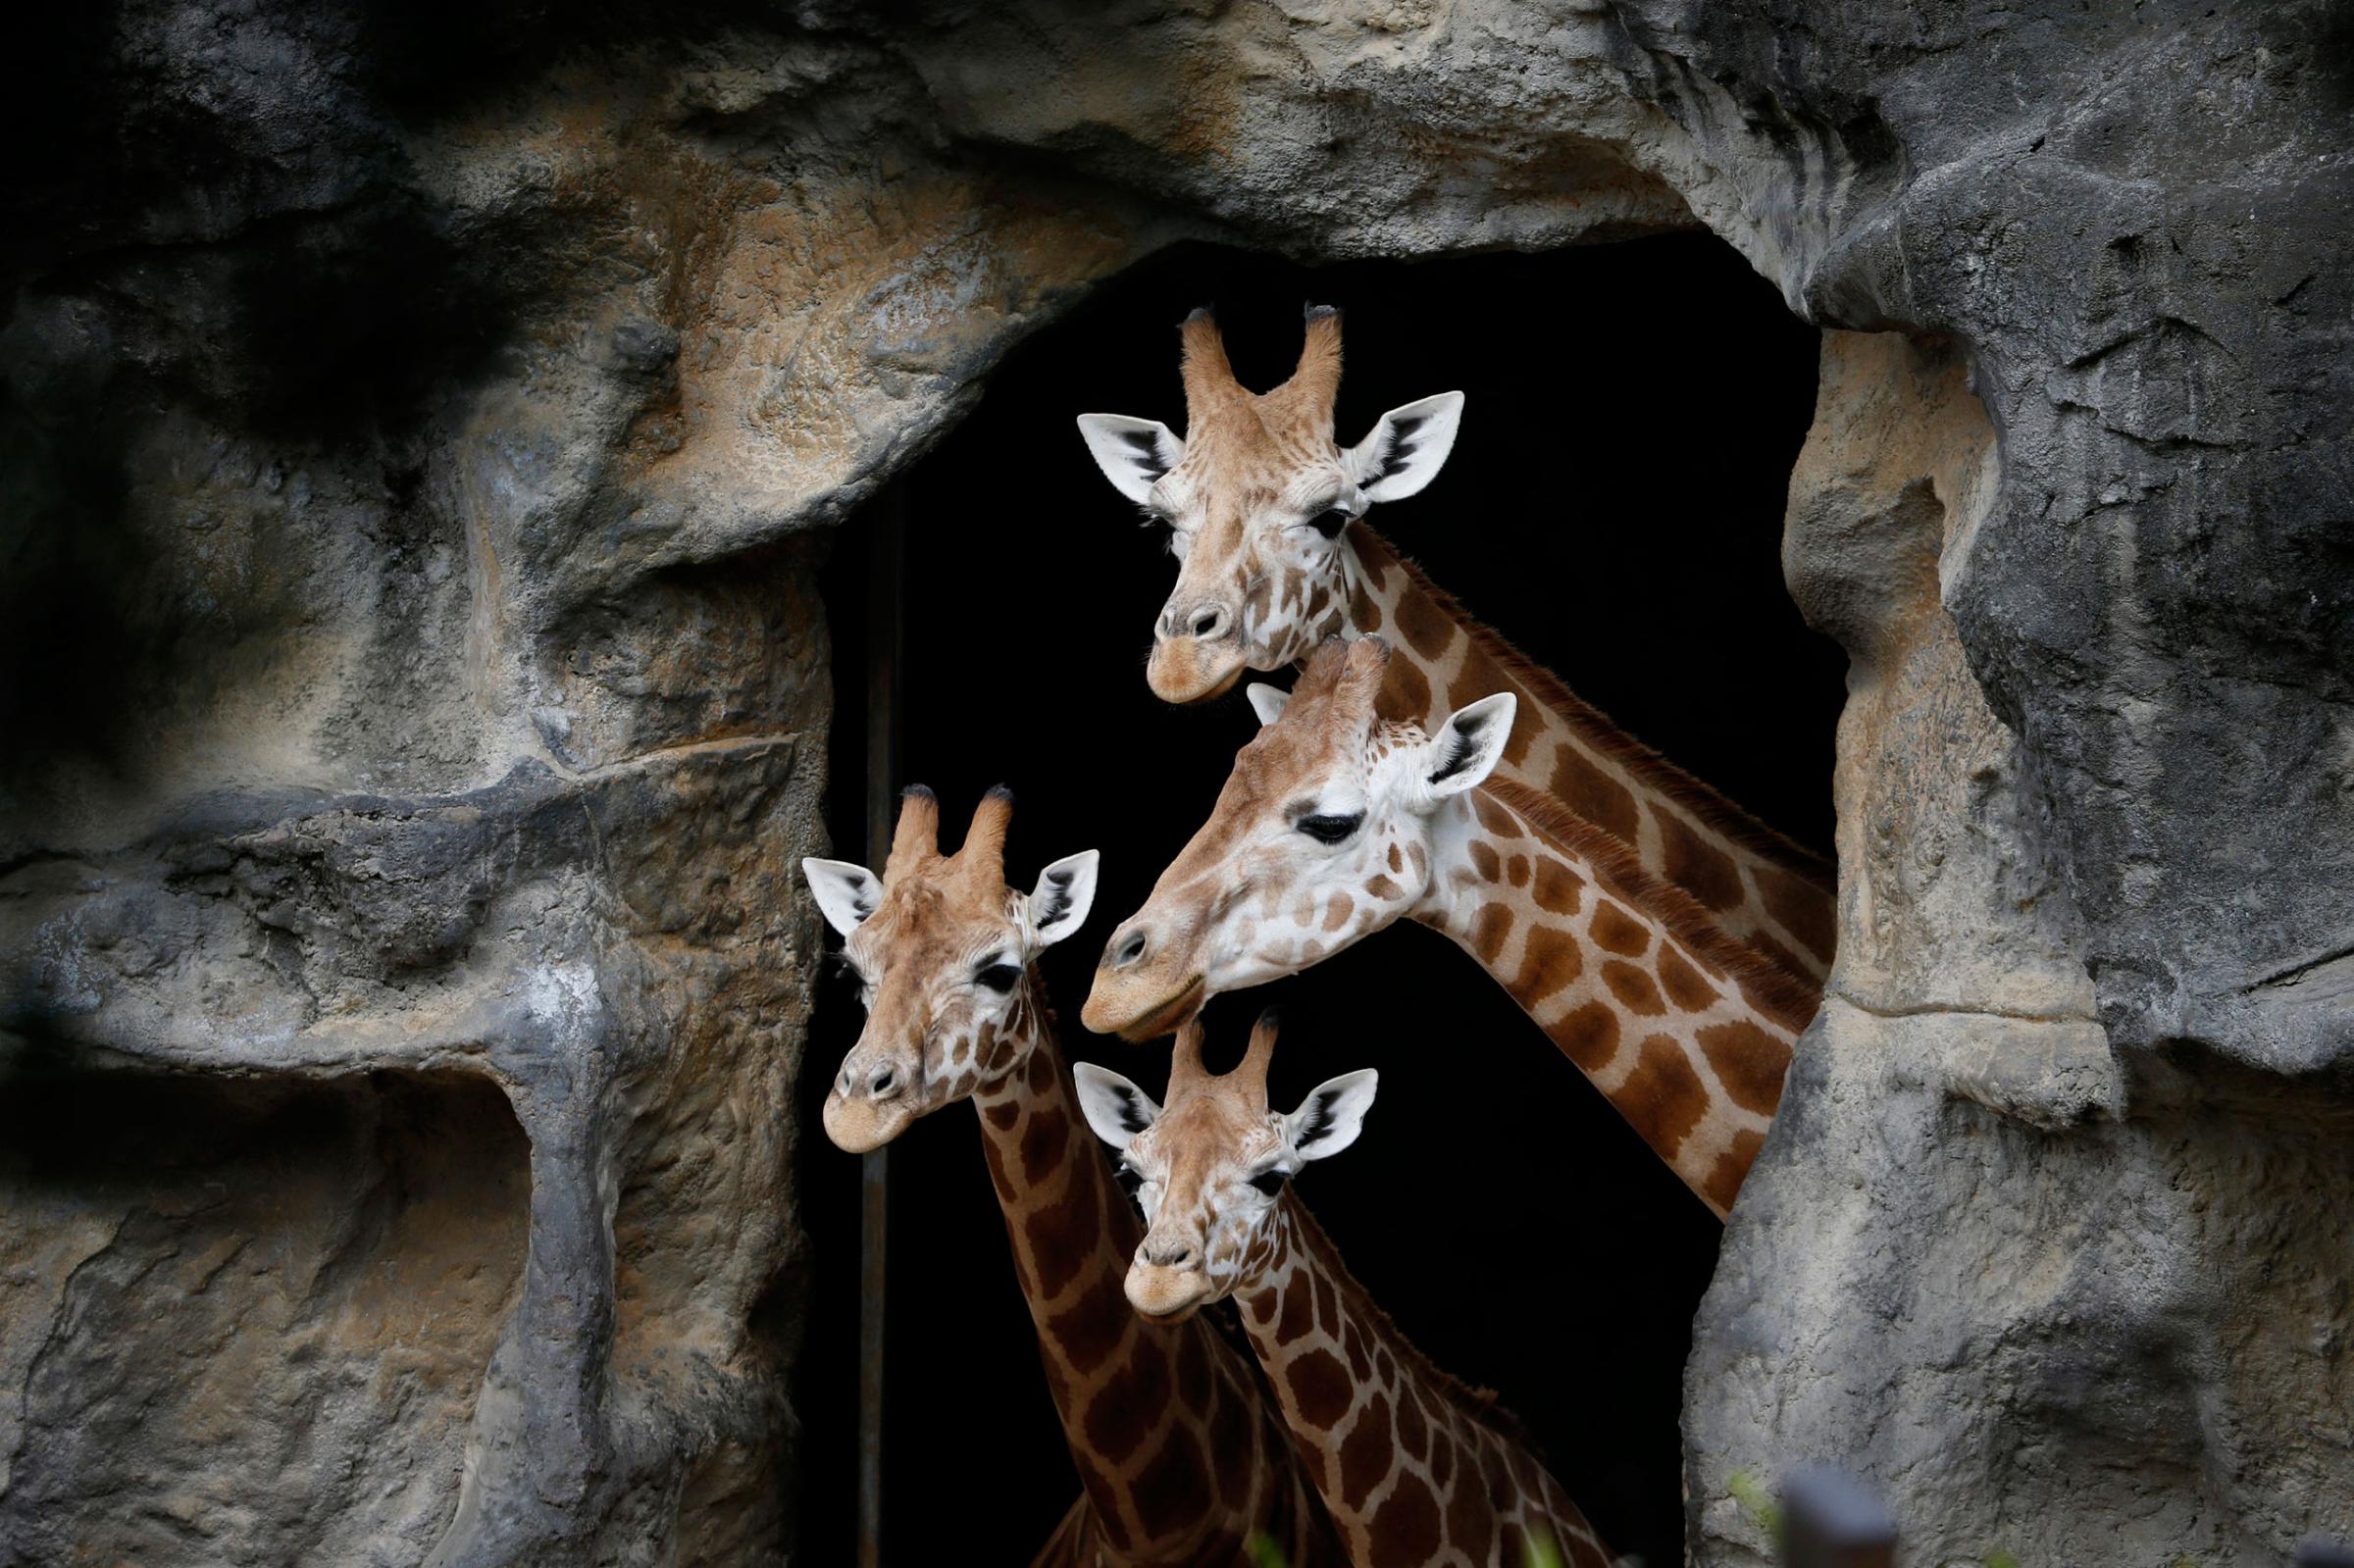 A family of giraffes look out from their enclosure before taking part in a Christmas-themed feeding session at Sydney's Taronga Park Zoo, Australia, Dec. 9, 2014.